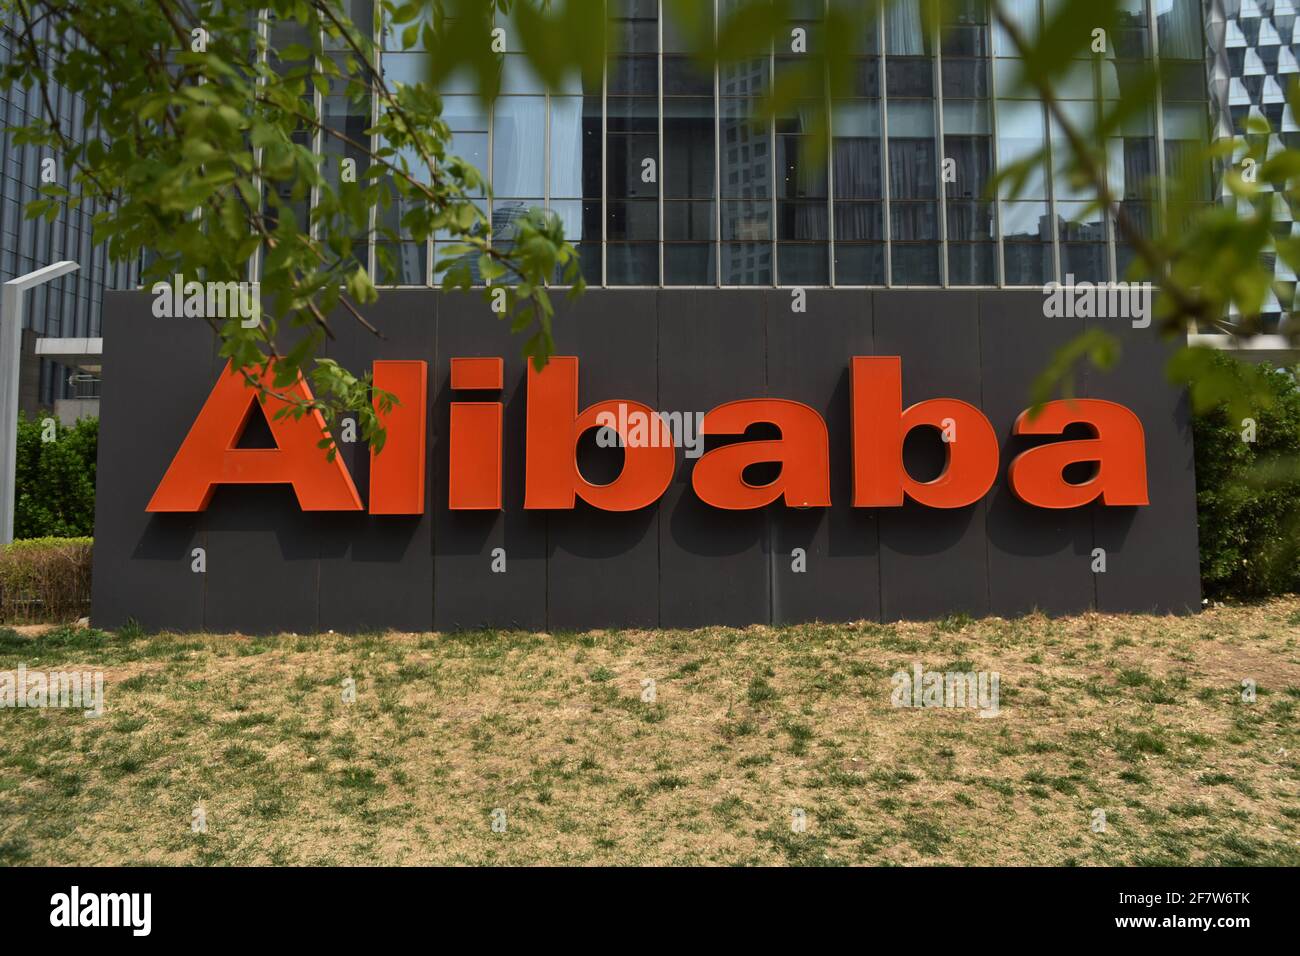 The Alibaba headquarters building in Beijing.The State Administration for Market Regulation of China slapped Alibaba with a hefty fine of nearly $2.8 billion for "alternatively" monopolistic practices. Alibaba issued an open letter: punishment is a wake-up call and spur, will create a more open platform environment. (Photo by Sheldon Cooper / SOPA Images/Sipa USA) Stock Photo